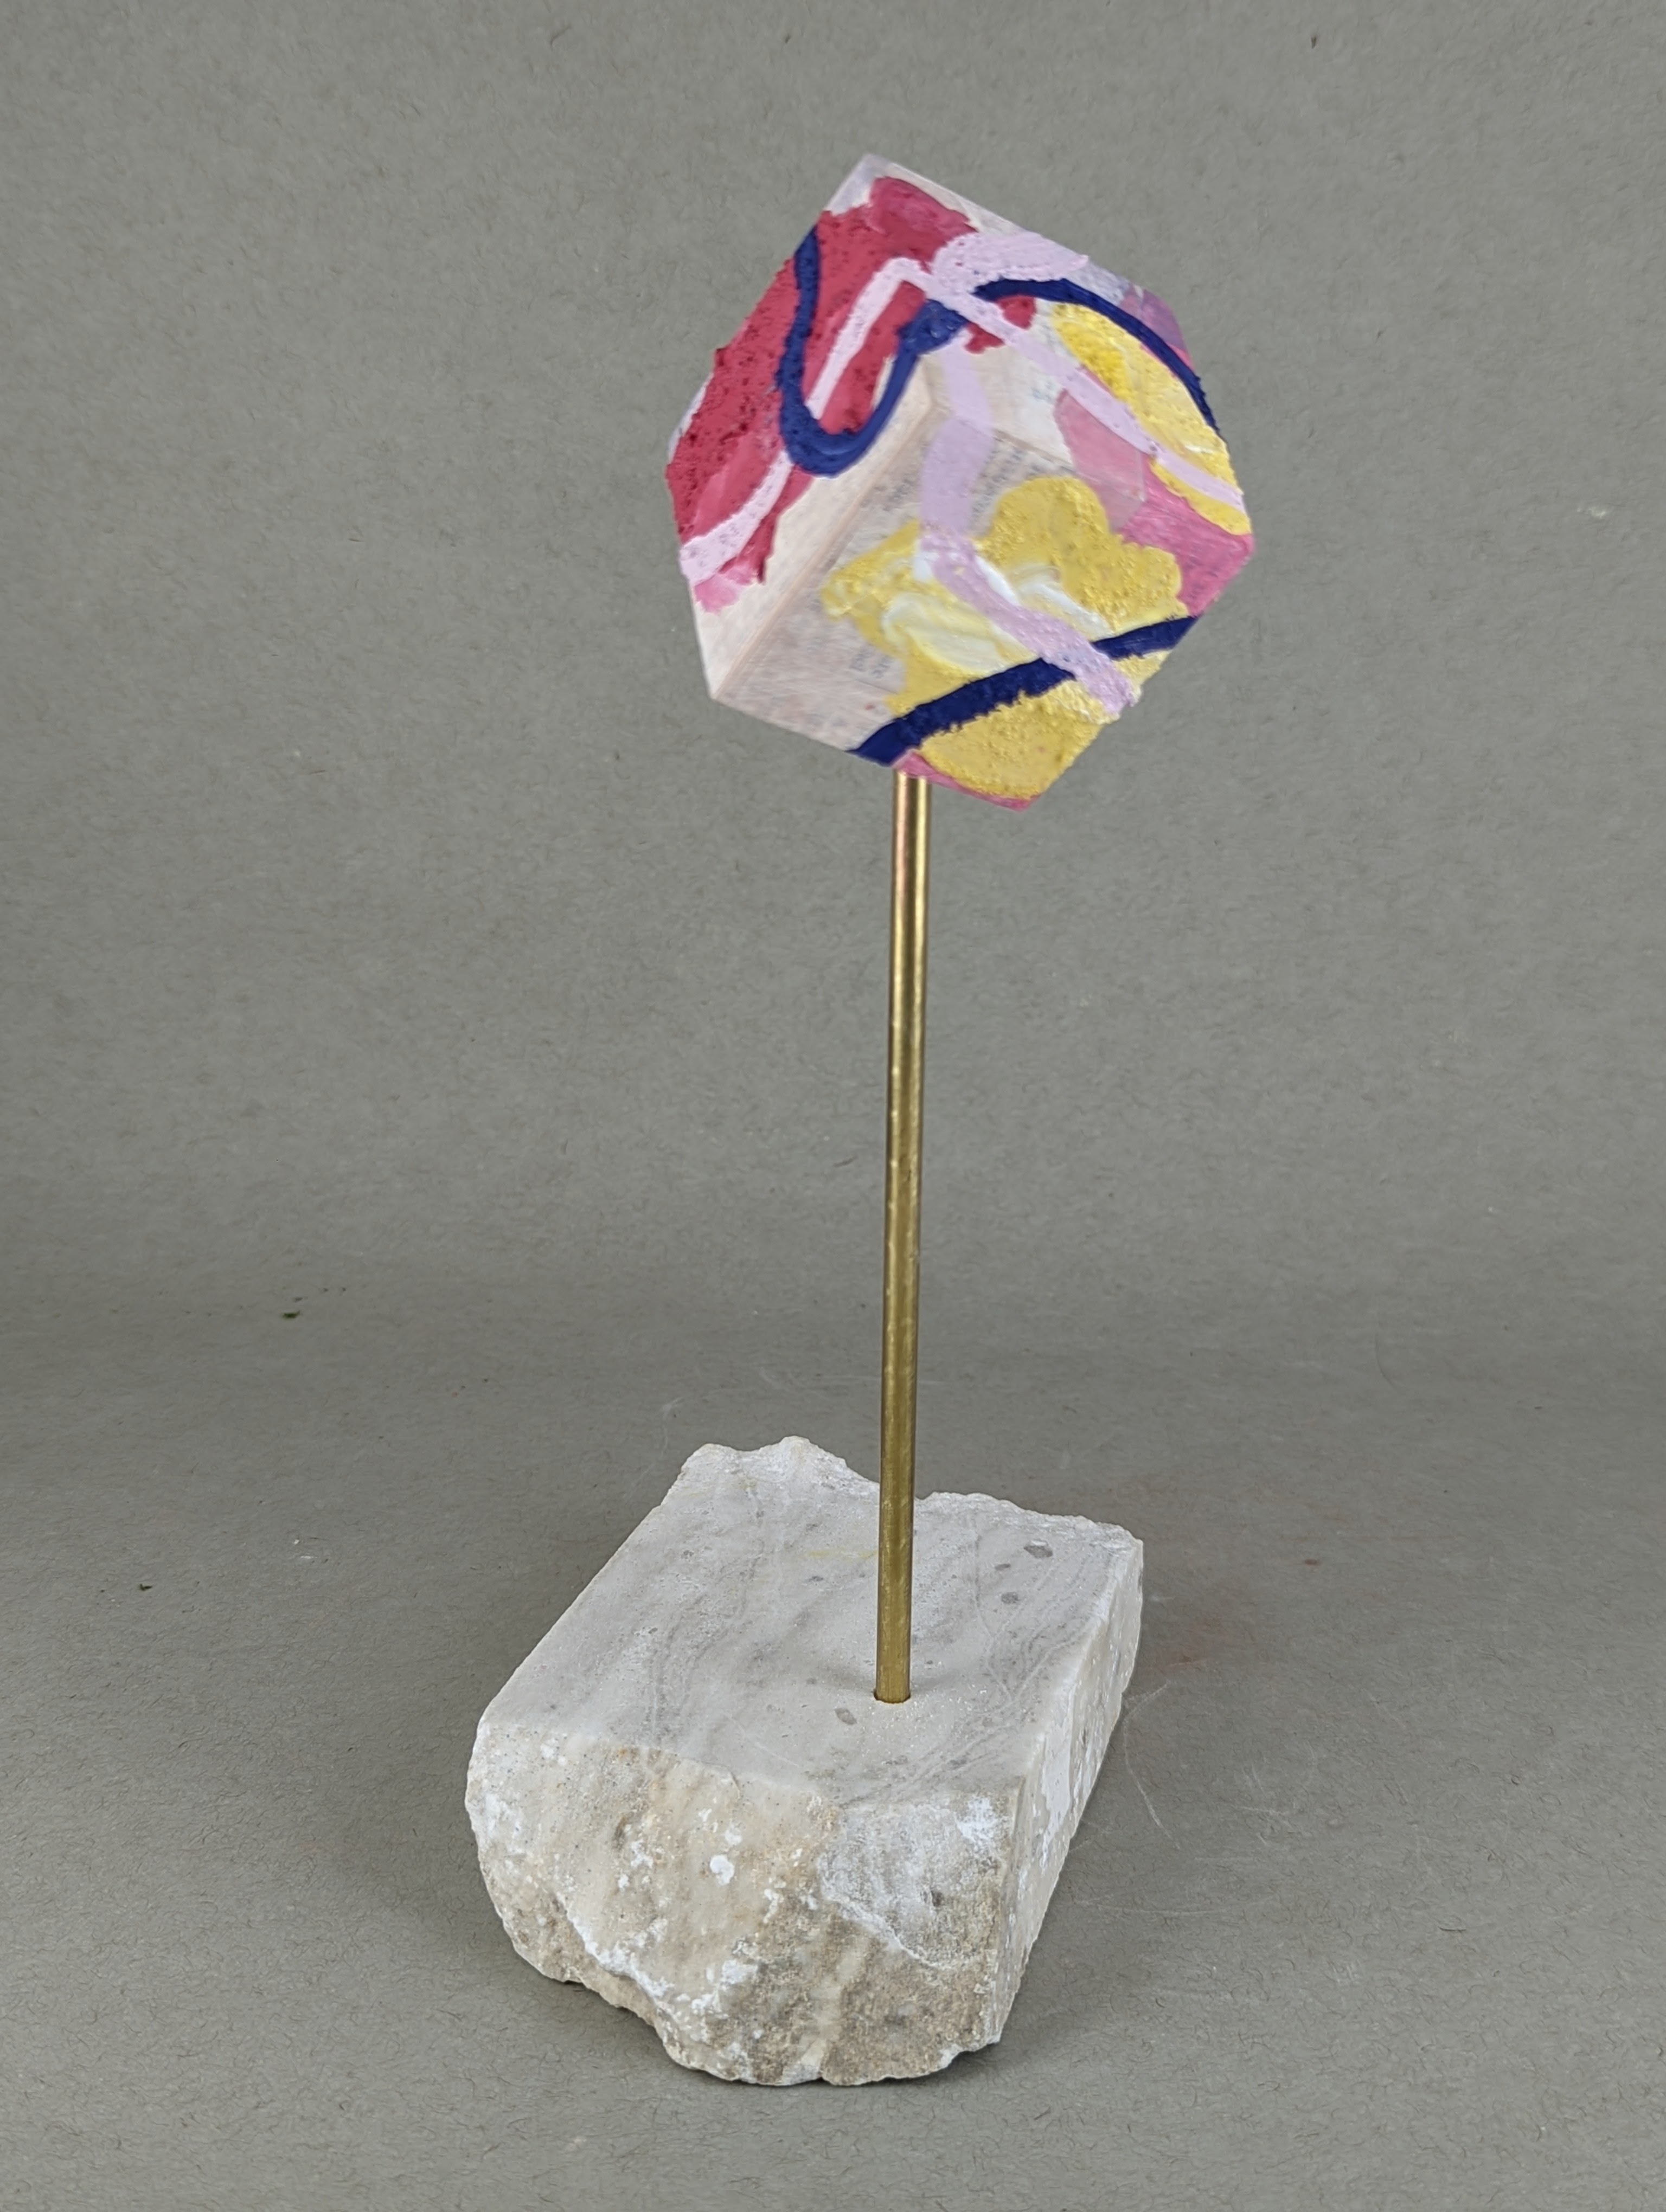 "We Have It Entirely," Frank Korb, Acrylic, Collage, Sand, Pine, Brass, Soapstone, 10" x 3" x 3", 2022.